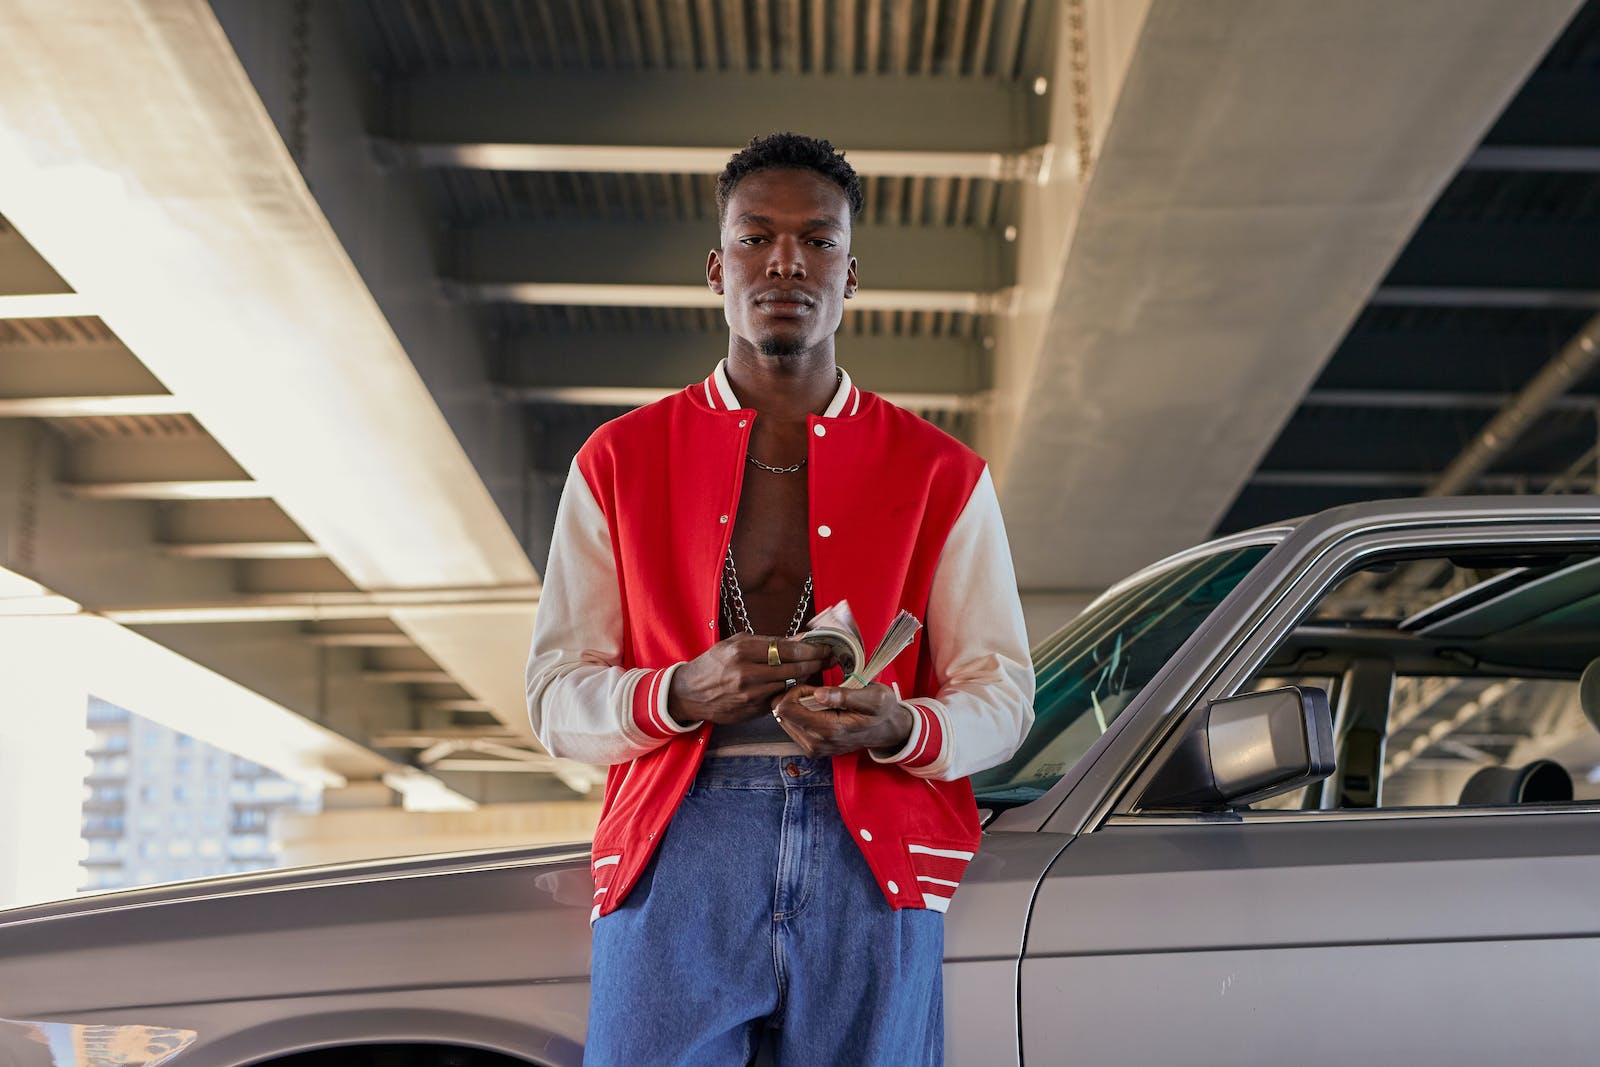 A Man in Red and White Jacket Leaning on the Car while Holding Money